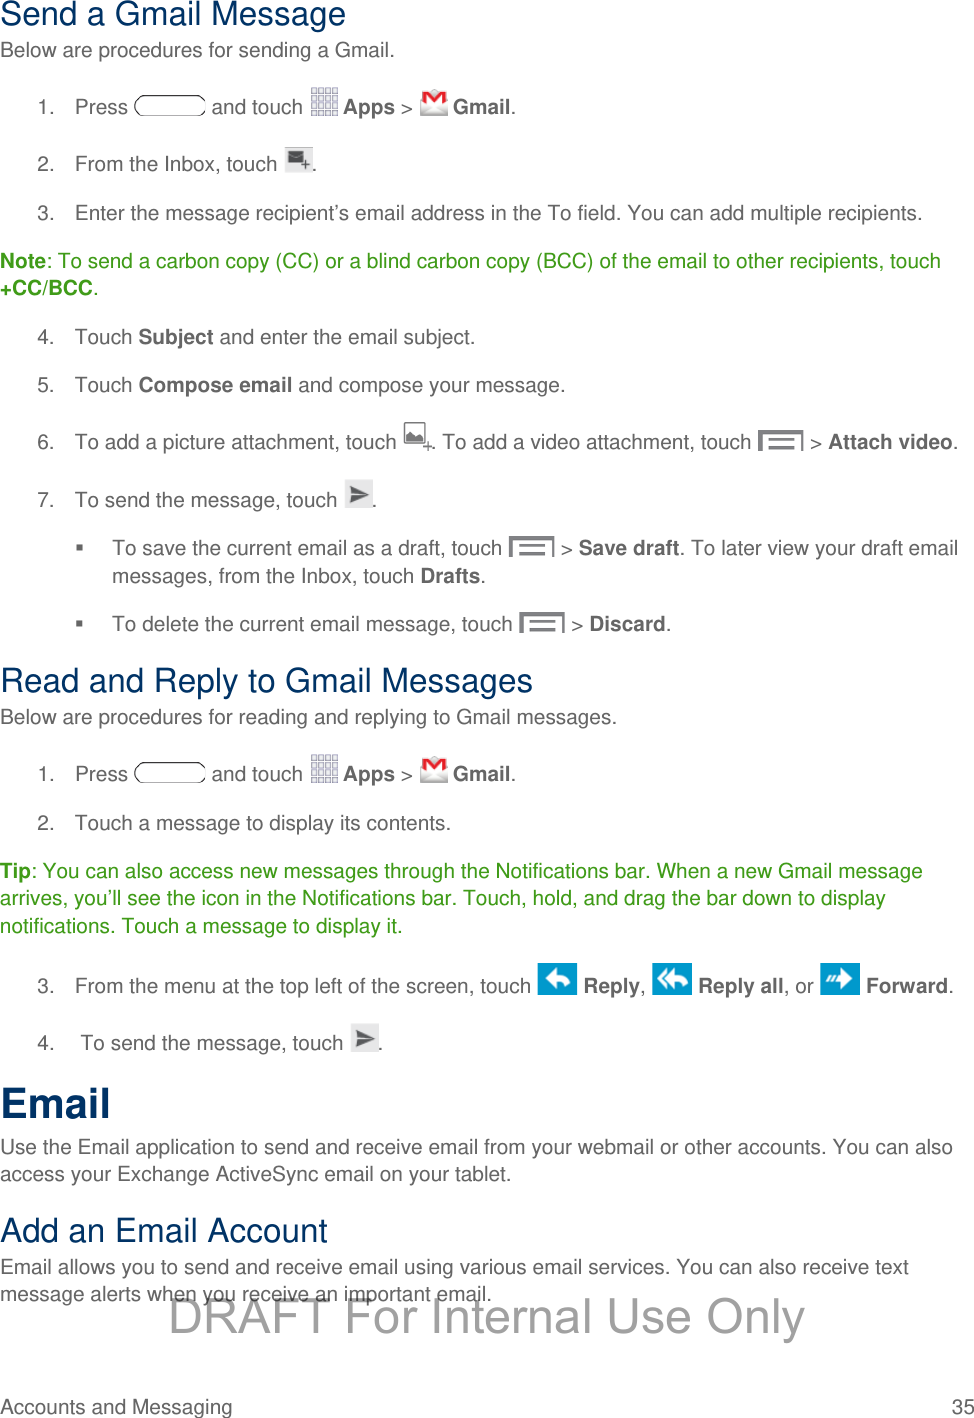 Send a Gmail Message Below are procedures for sending a Gmail. 1. Press   and touch   Apps &gt;   Gmail. 2. From the Inbox, touch  . 3. Enter the message recipient’s email address in the To field. You can add multiple recipients. Note: To send a carbon copy (CC) or a blind carbon copy (BCC) of the email to other recipients, touch +CC/BCC. 4. Touch Subject and enter the email subject. 5. Touch Compose email and compose your message.  6.  To add a picture attachment, touch . To add a video attachment, touch   &gt; Attach video. 7. To send the message, touch  .  To save the current email as a draft, touch  &gt; Save draft. To later view your draft email messages, from the Inbox, touch Drafts.  To delete the current email message, touch  &gt; Discard. Read and Reply to Gmail Messages Below are procedures for reading and replying to Gmail messages. 1. Press   and touch   Apps &gt;   Gmail. 2. Touch a message to display its contents. Tip: You can also access new messages through the Notifications bar. When a new Gmail message arrives, you’ll see the icon in the Notifications bar. Touch, hold, and drag the bar down to display notifications. Touch a message to display it.  3. From the menu at the top left of the screen, touch   Reply,   Reply all, or   Forward. 4.   To send the message, touch  . Email Use the Email application to send and receive email from your webmail or other accounts. You can also access your Exchange ActiveSync email on your tablet. Add an Email Account Email allows you to send and receive email using various email services. You can also receive text message alerts when you receive an important email. Accounts and Messaging 35   DRAFT For Internal Use Only